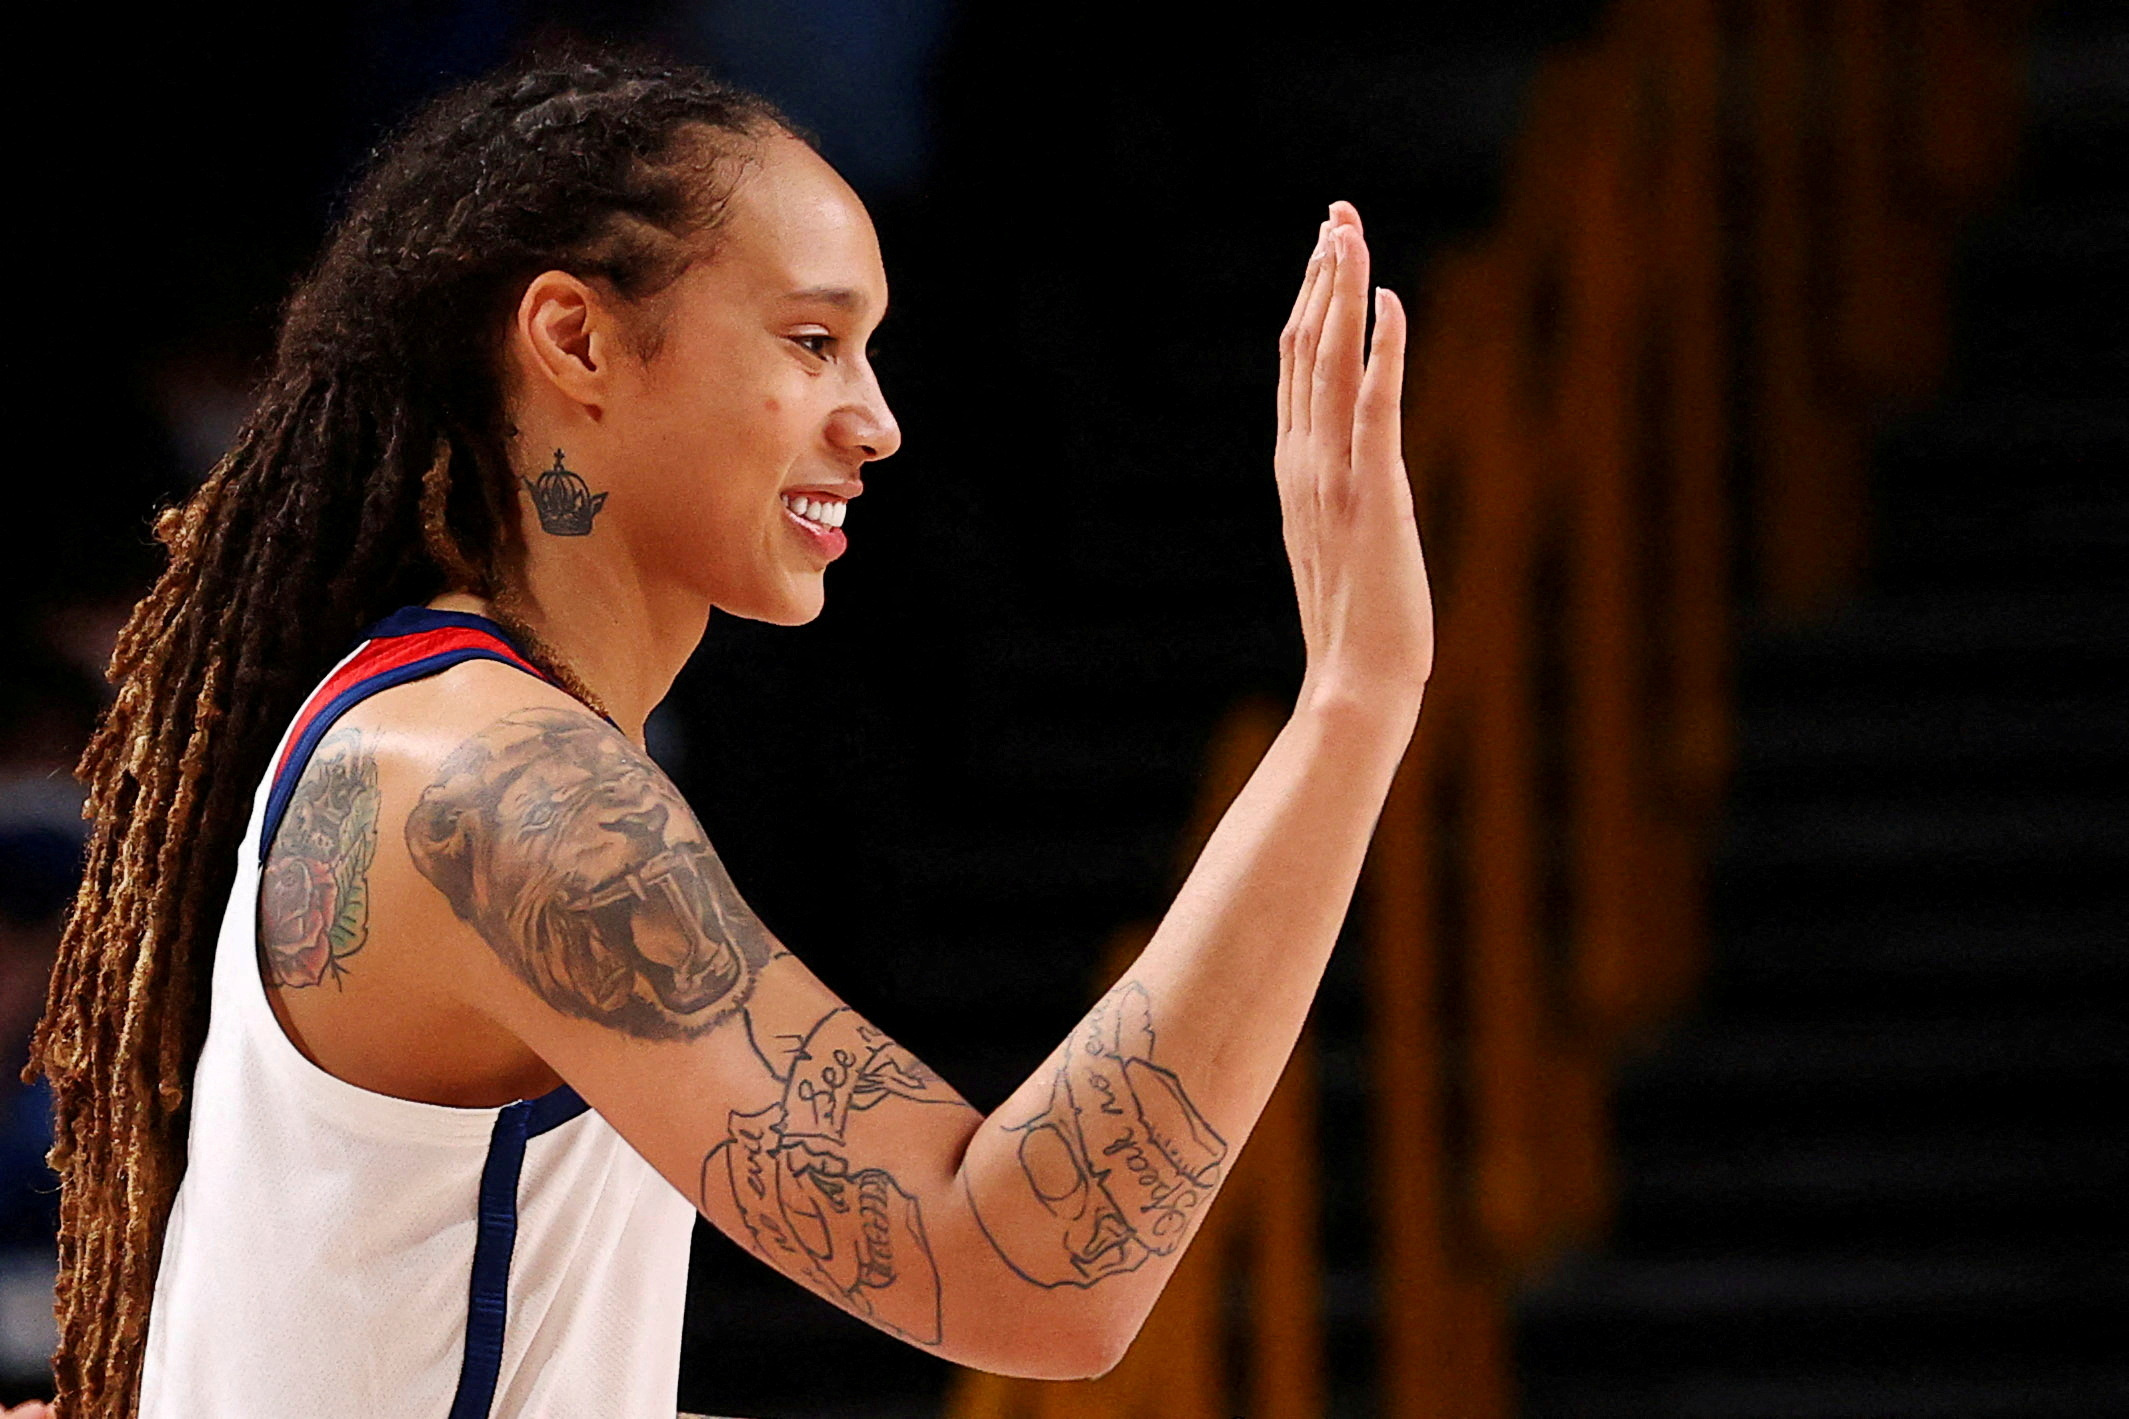 FILE PHOTO: Brittney Griner of the United States congratulates a teammate during their women's basketball gold medal match against Japan at the Tokyo 2020 Summer Olympics at the Saitama Super Arena in Saitama, Japan, on August 8, 2021. Photo taken on August 8, 2021. REUTERS/Brian Snyder